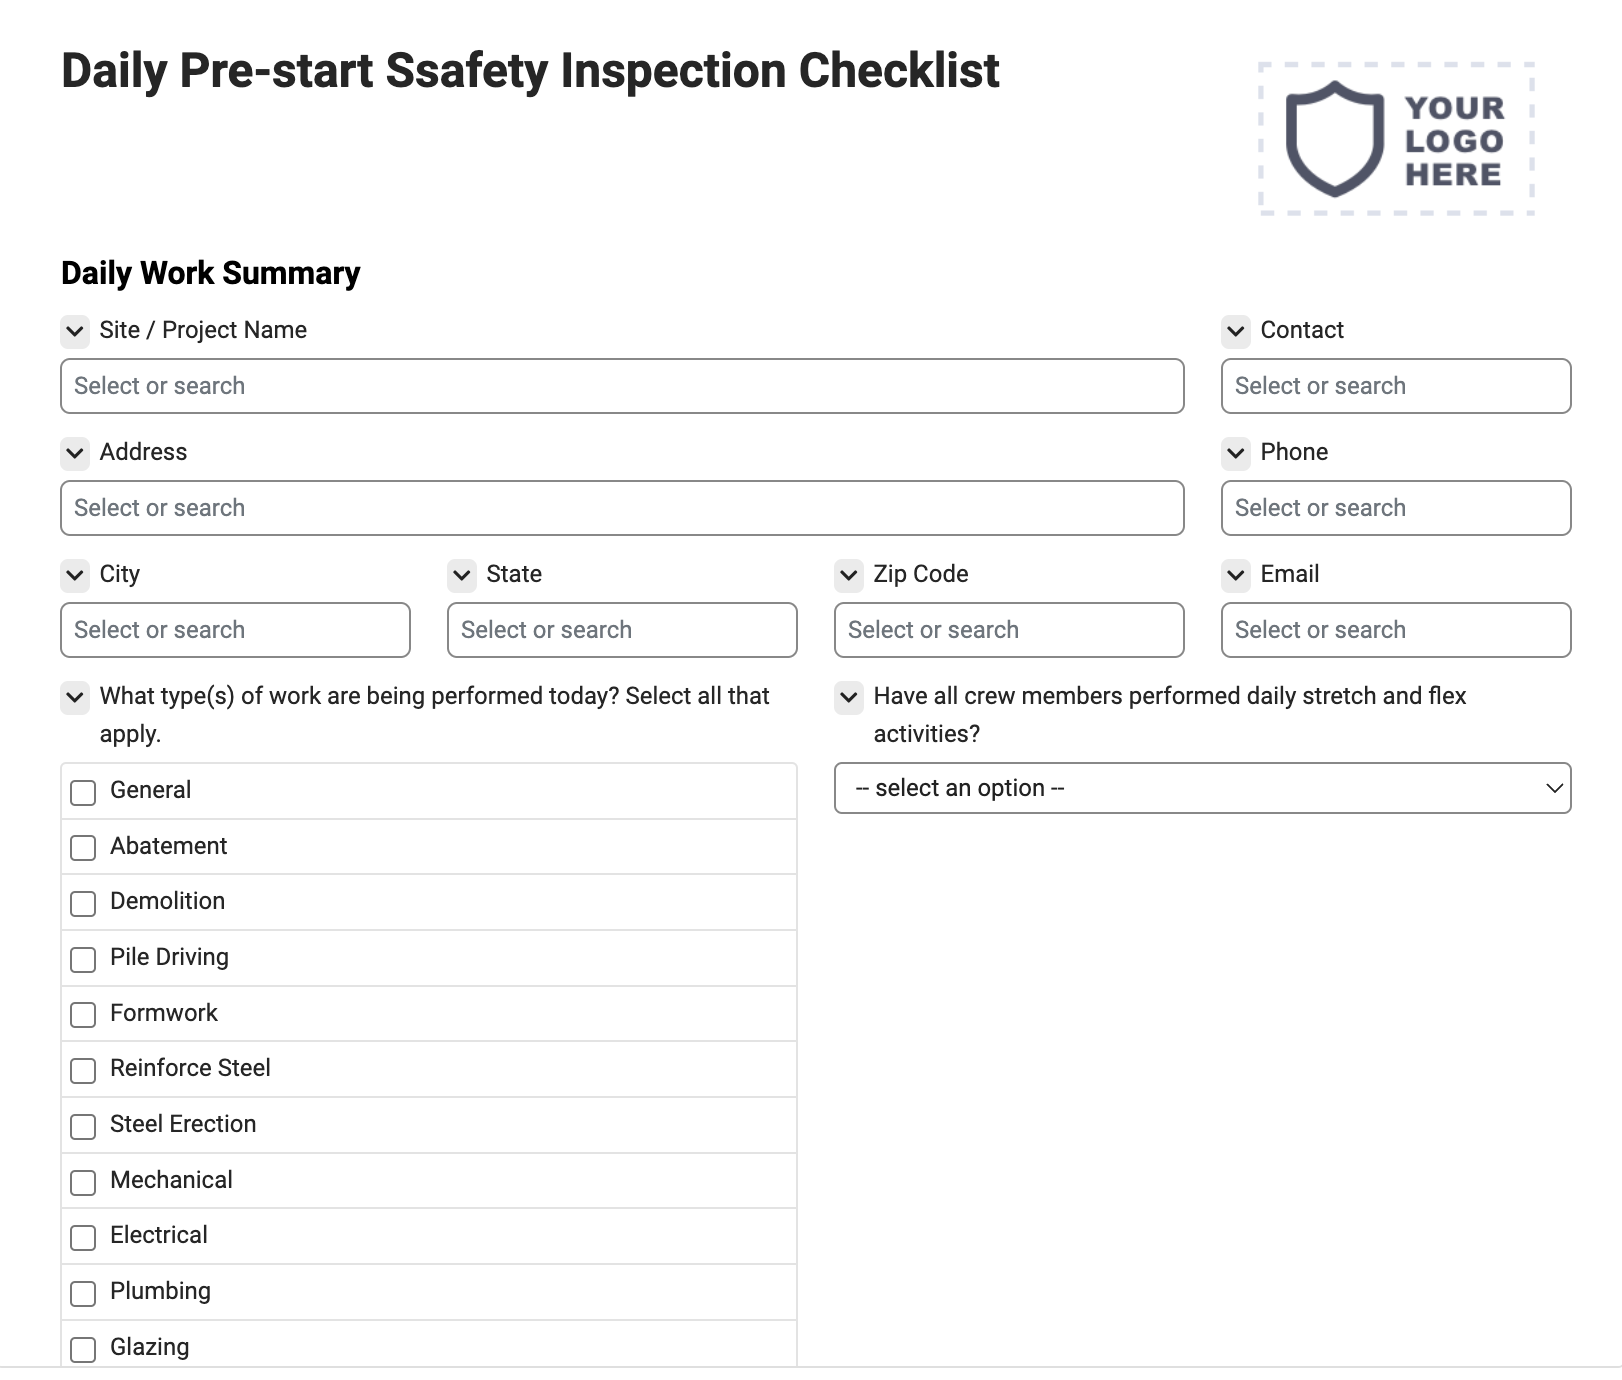 Daily Pre-start Safety Inspection Checklist